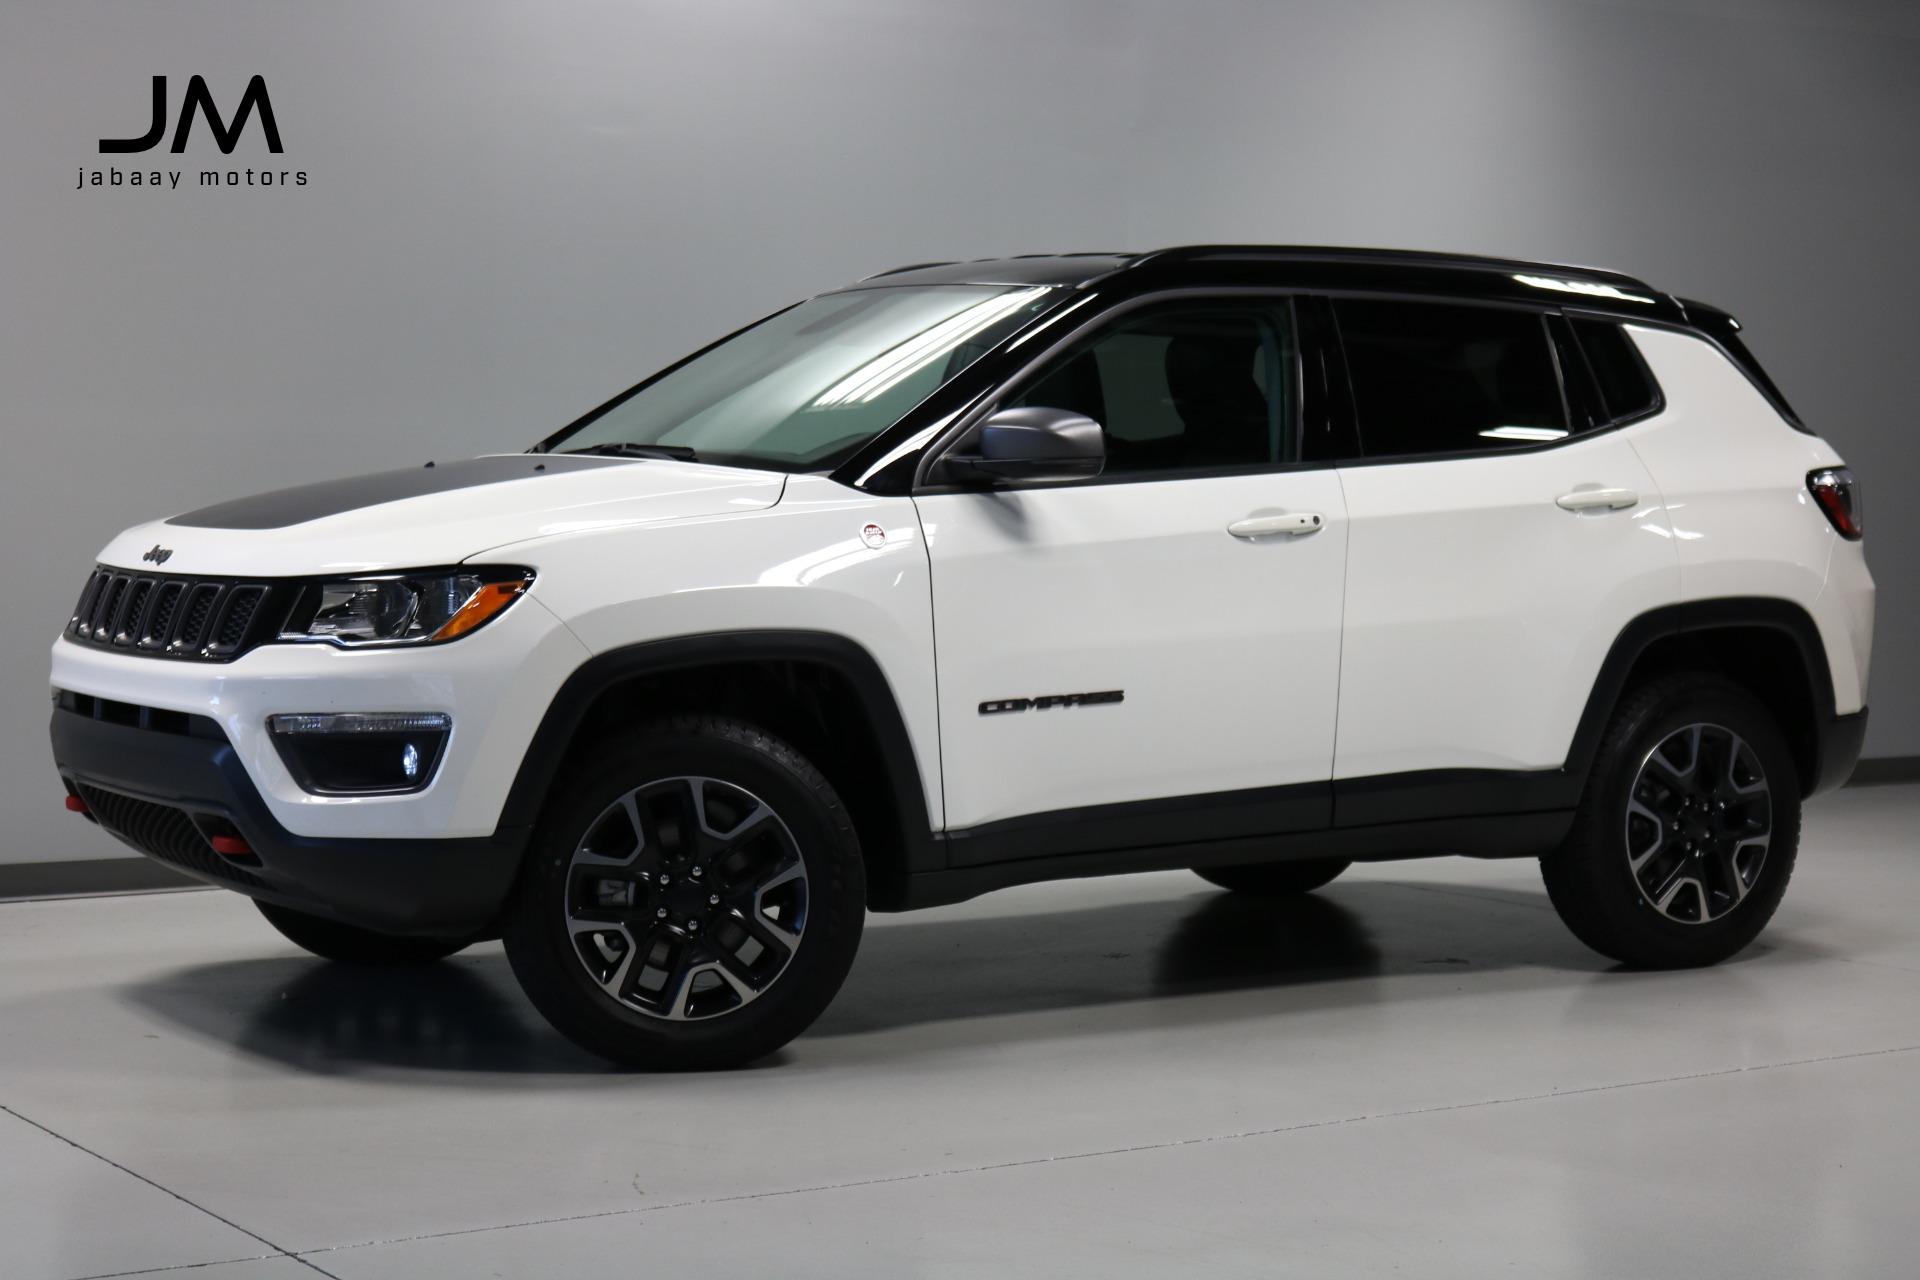 Used 19 Jeep Compass Trailhawk 4x4 4dr Suv For Sale Sold Jabaay Motors Inc Stock Jm7190